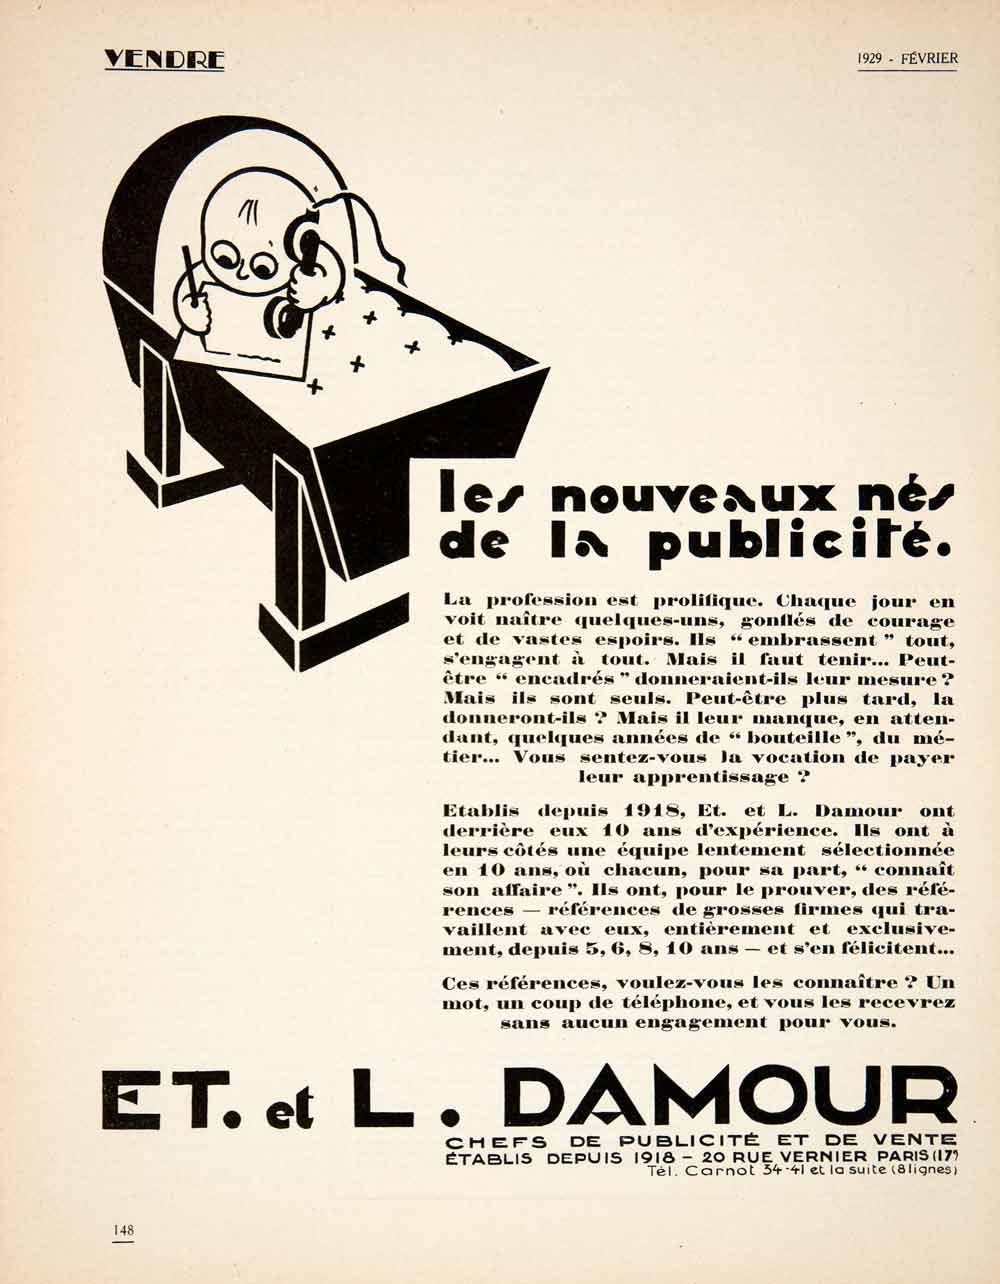 1929 Ad Damour French Advertising Agency Baby Cradle 20 Rue Vernier Paris VEN5